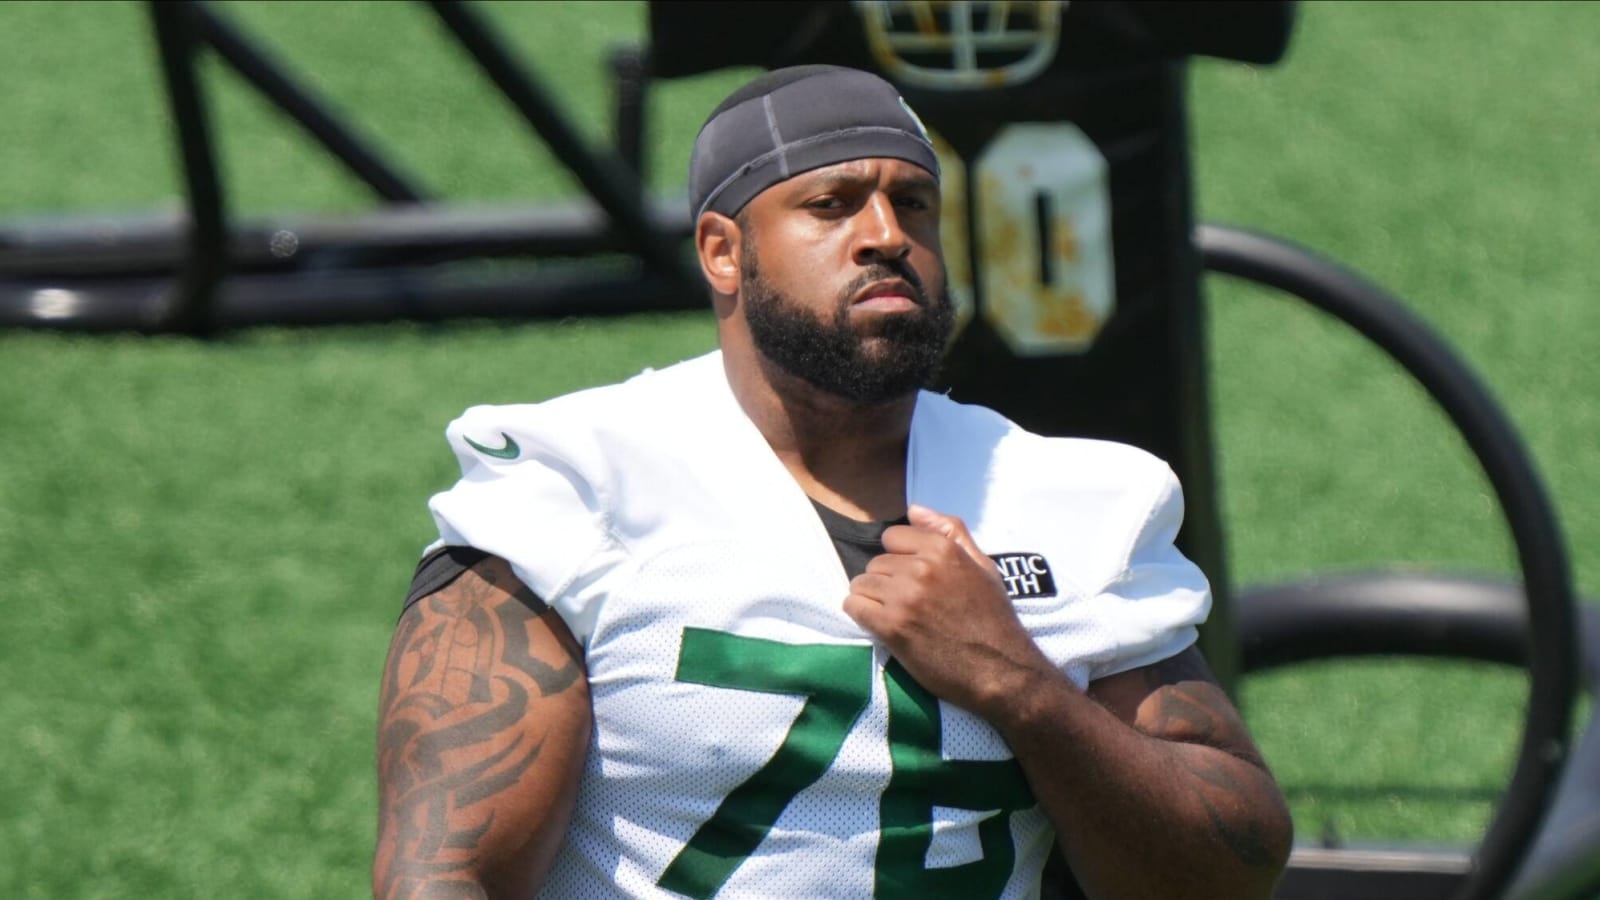 Final NY Jets Inury Report; Duane Brown & Billy Turner Out